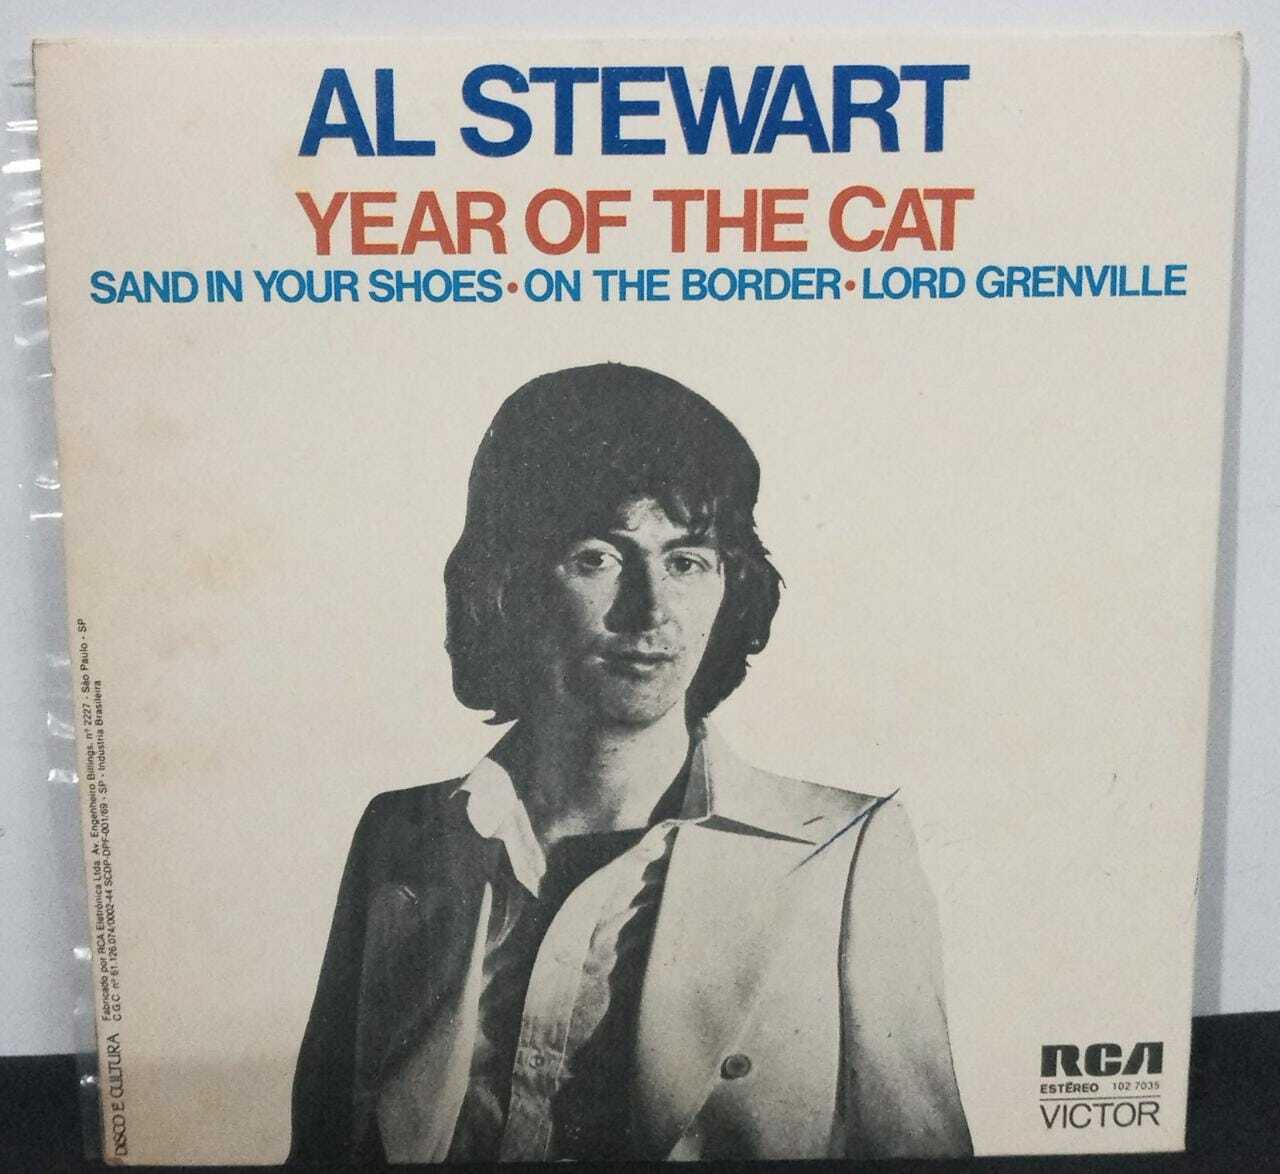 Vinil Compacto - Al Stewart - Year Of The Cat